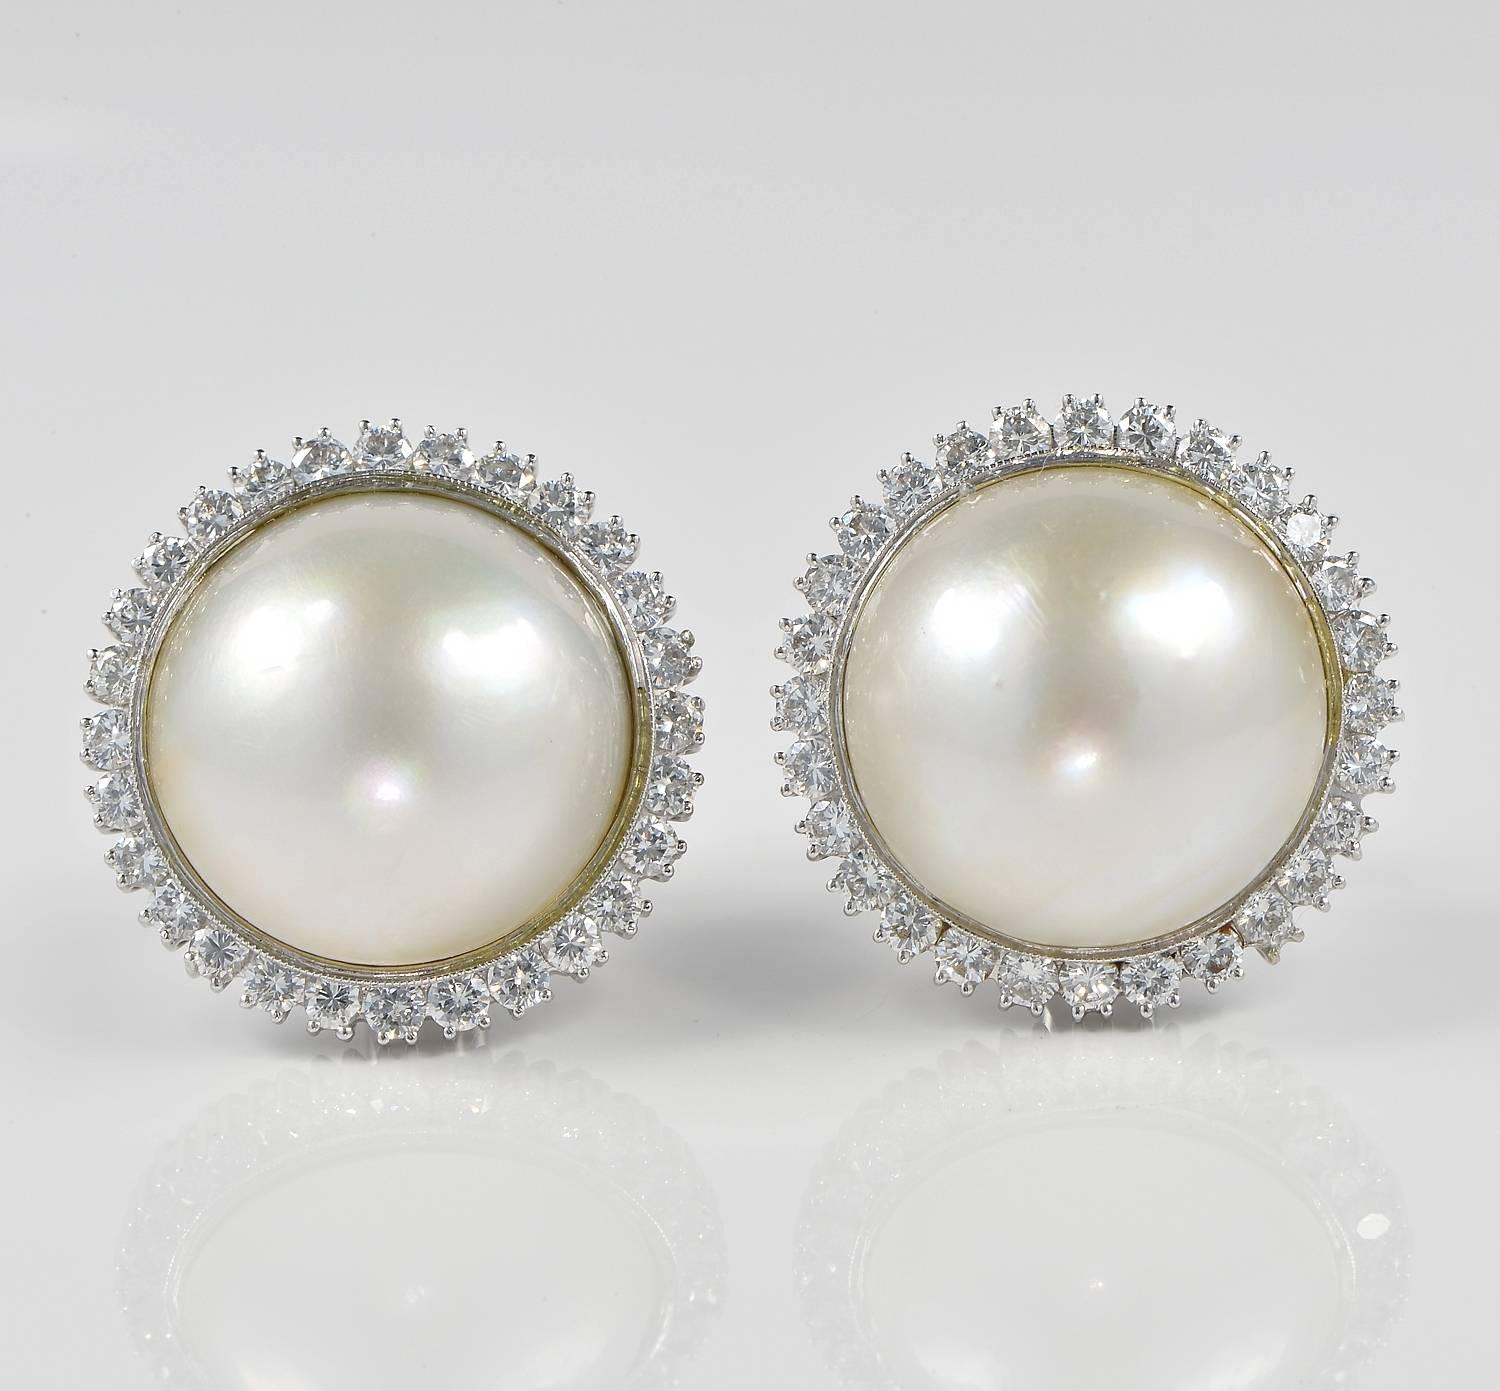 Spectacular classy pair of large sized Mabe Pearl complemented by halo of best Diamonds
Everlasting pair to wear at any occasion, the favourite style by Lady D
Quality all round, precious hand workmanship boasting 2.60 Ct of G VVS/VS Diamonds 17 mm.